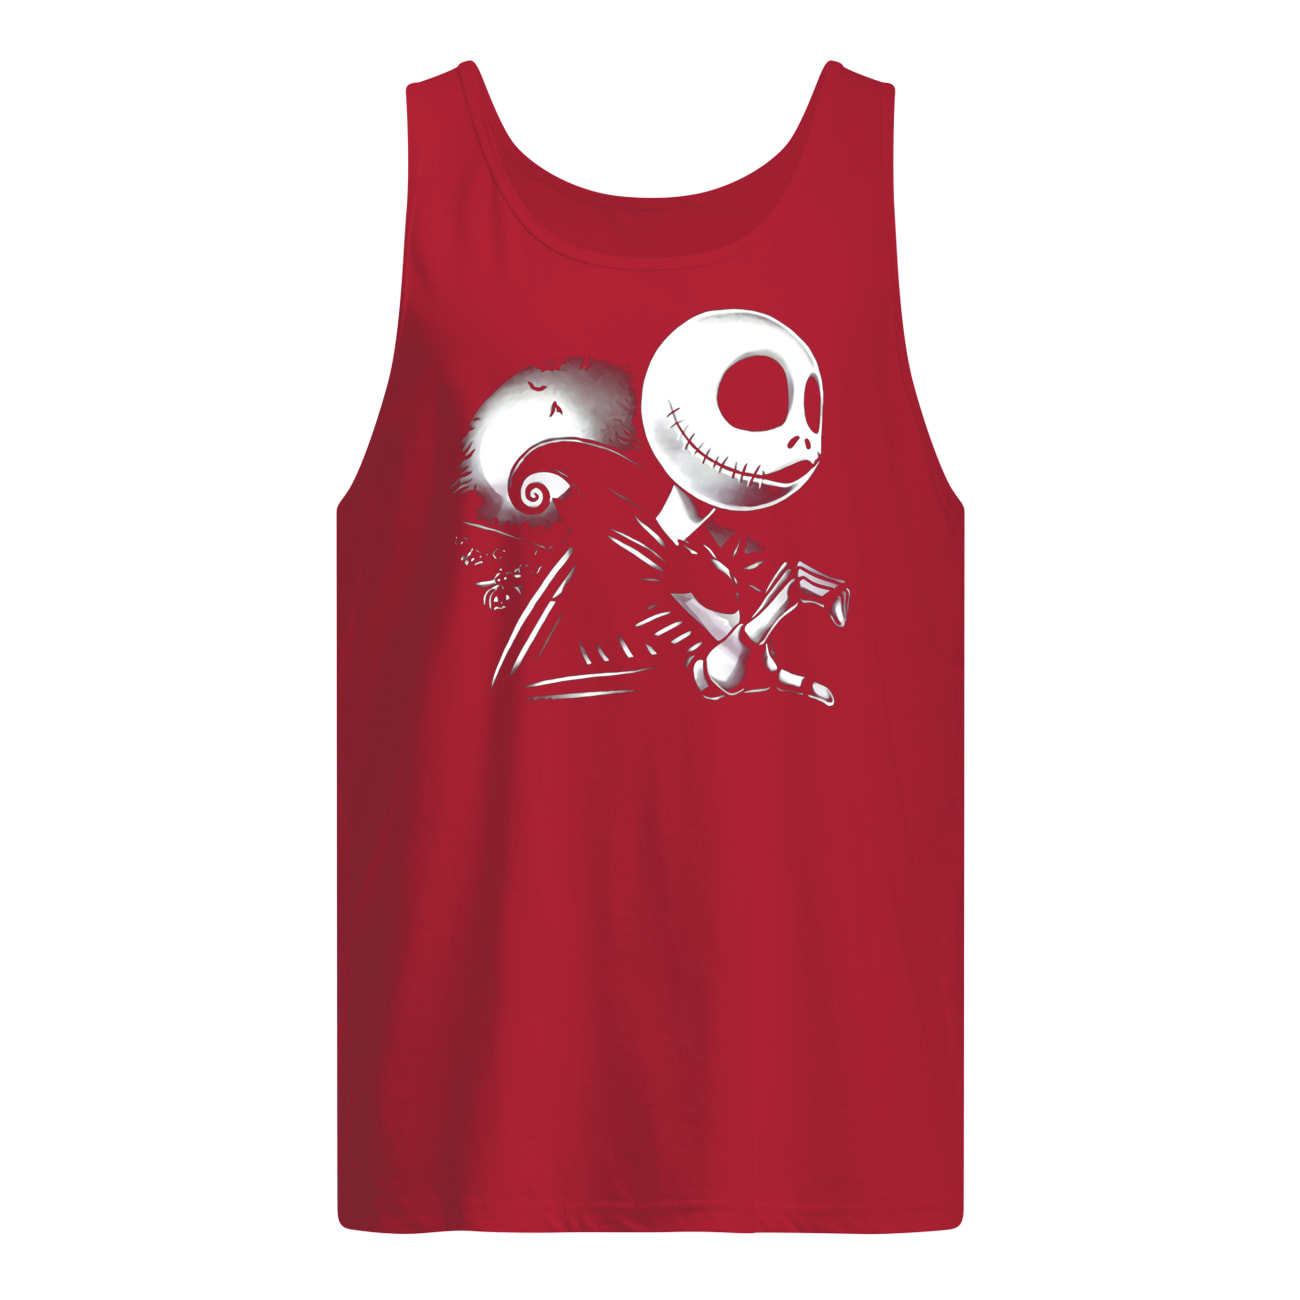 The nightmare before christmas jack skellington and sally love couples halloween tank top